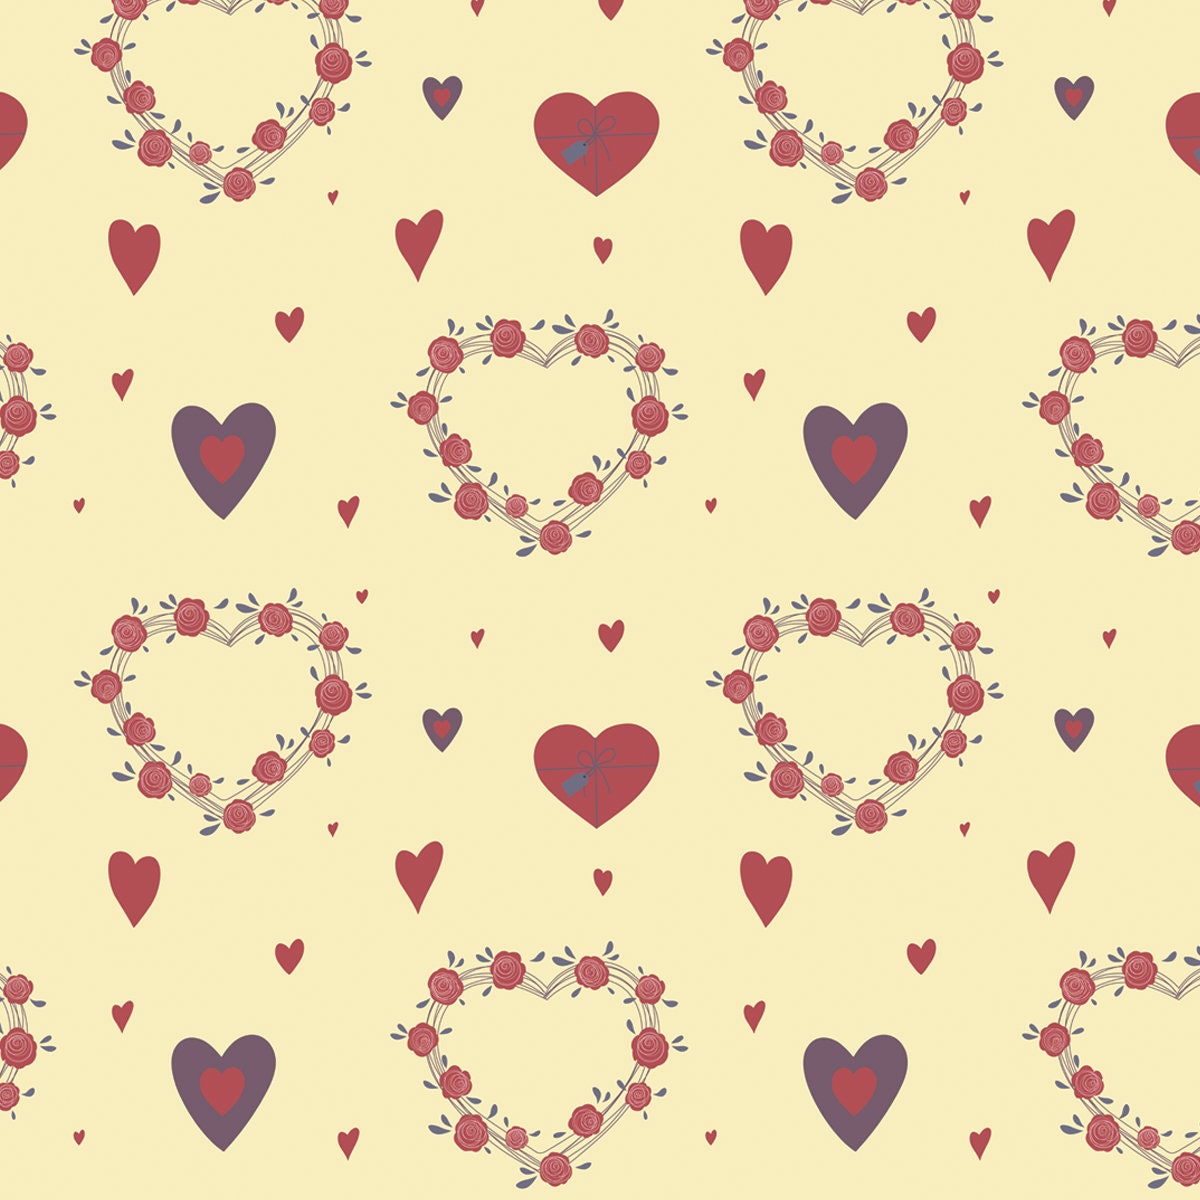 Red and Purple Hearts with Flowers on Beige Background Wallpaper Kitchen Mural